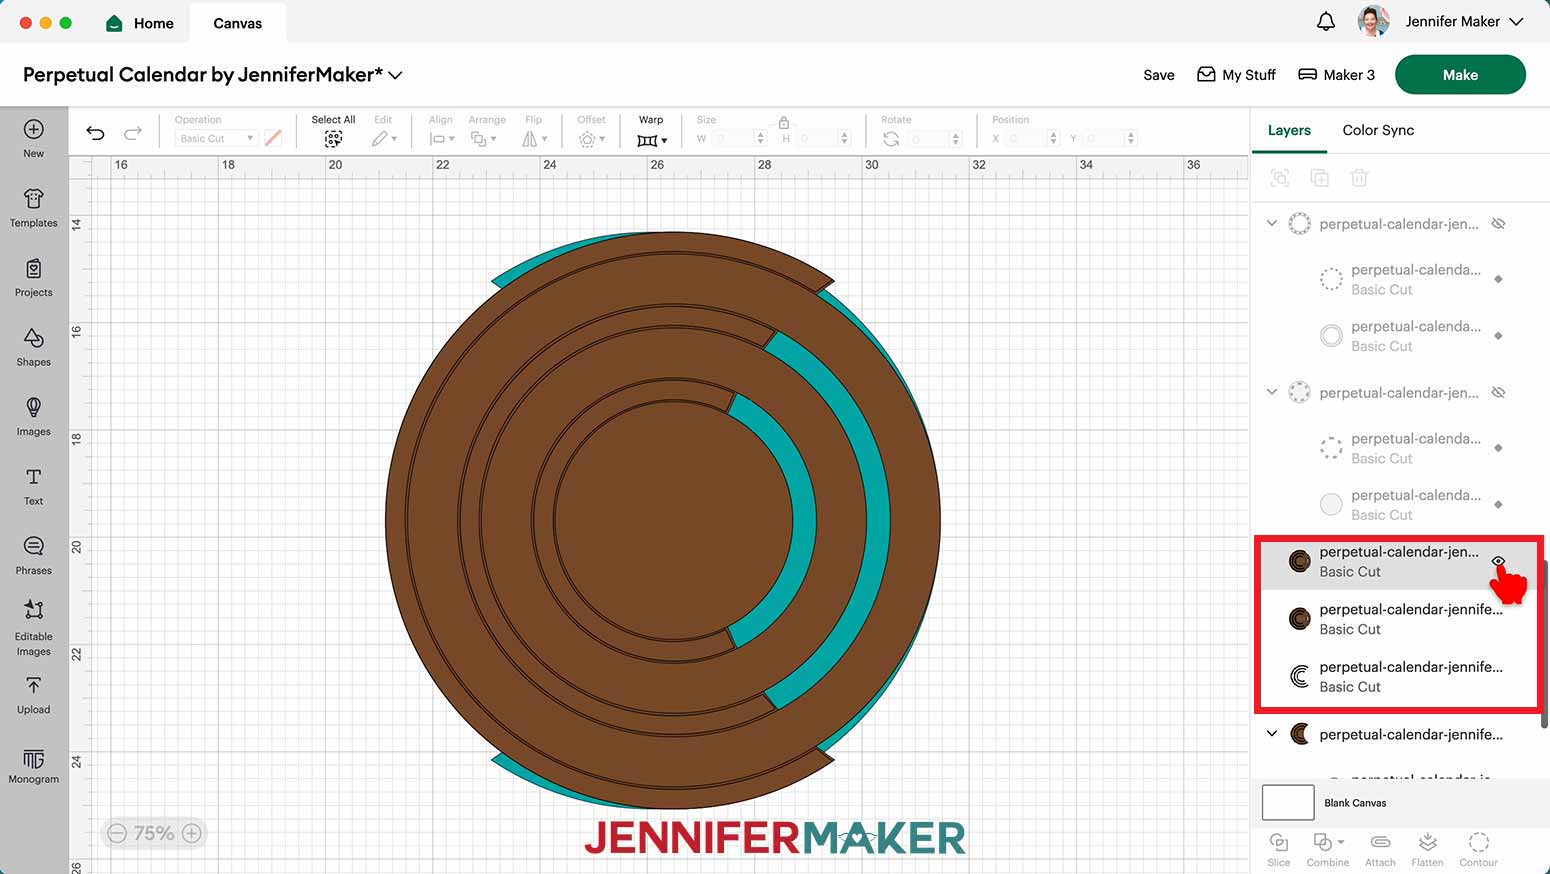 In Cricut Design Space, the brown track and wheel pieces for the perpetual calendar, grouped into three separate layers in the Layers Panel